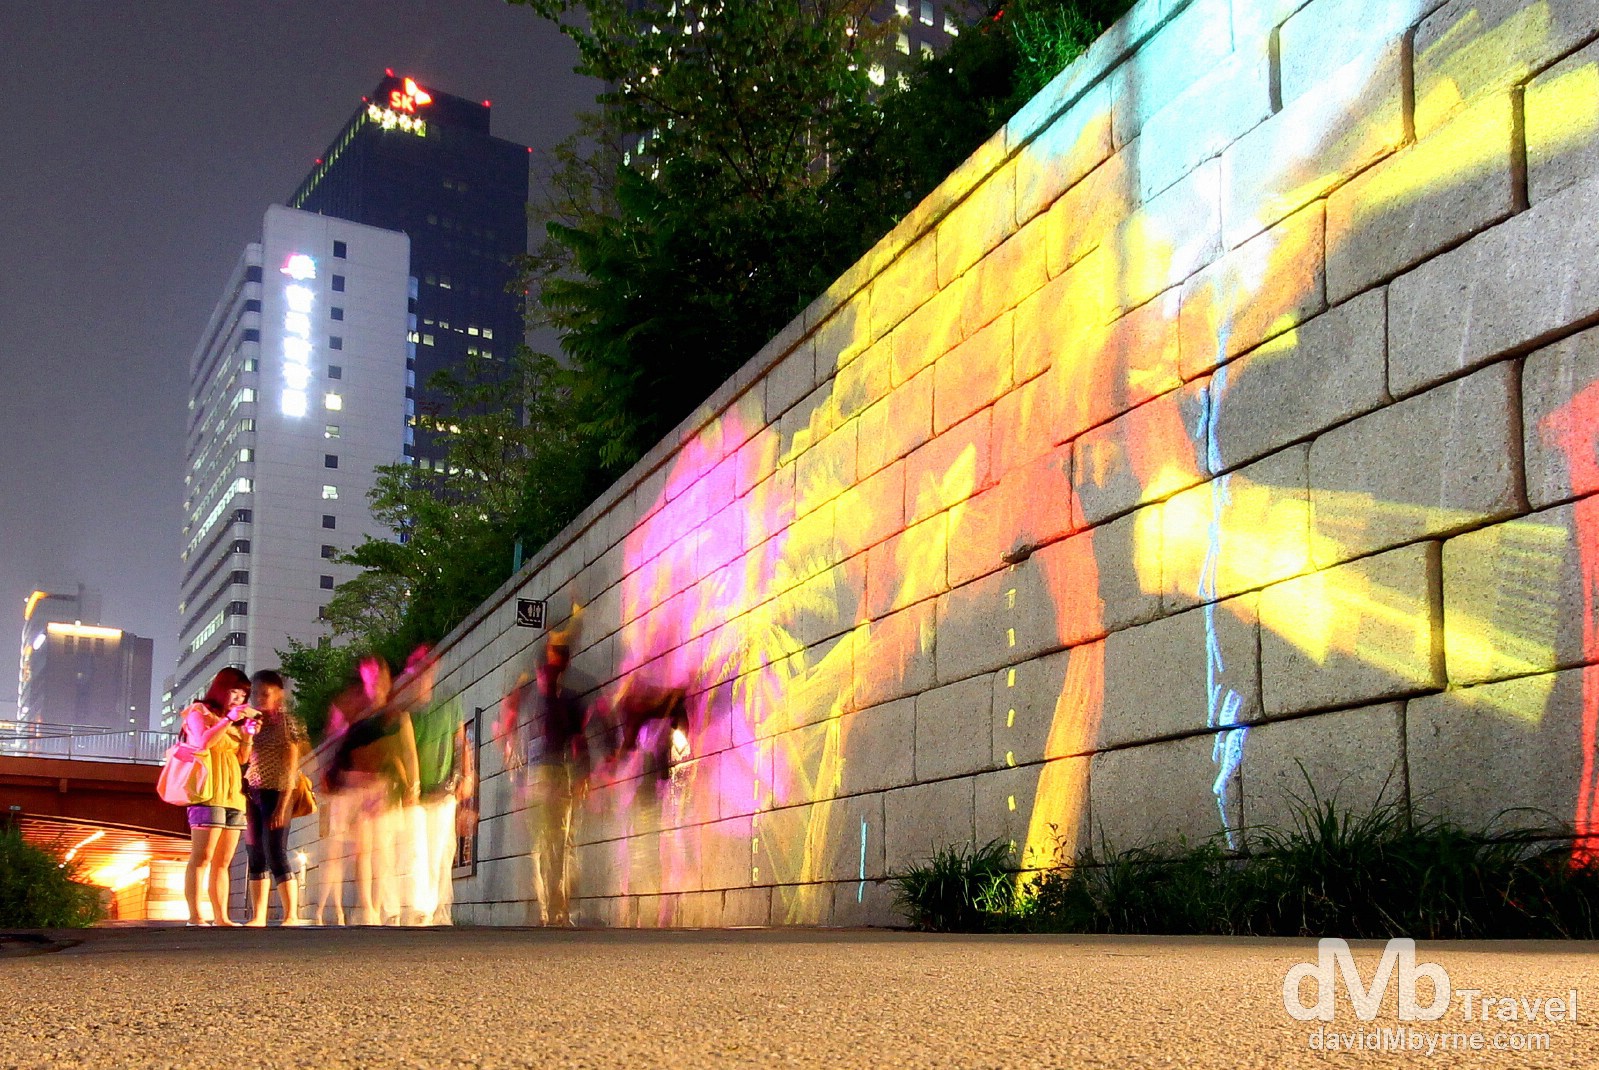 Light Show by the Cheonggyecheon Stream in Seoul, South Korea. July 12th 2012.